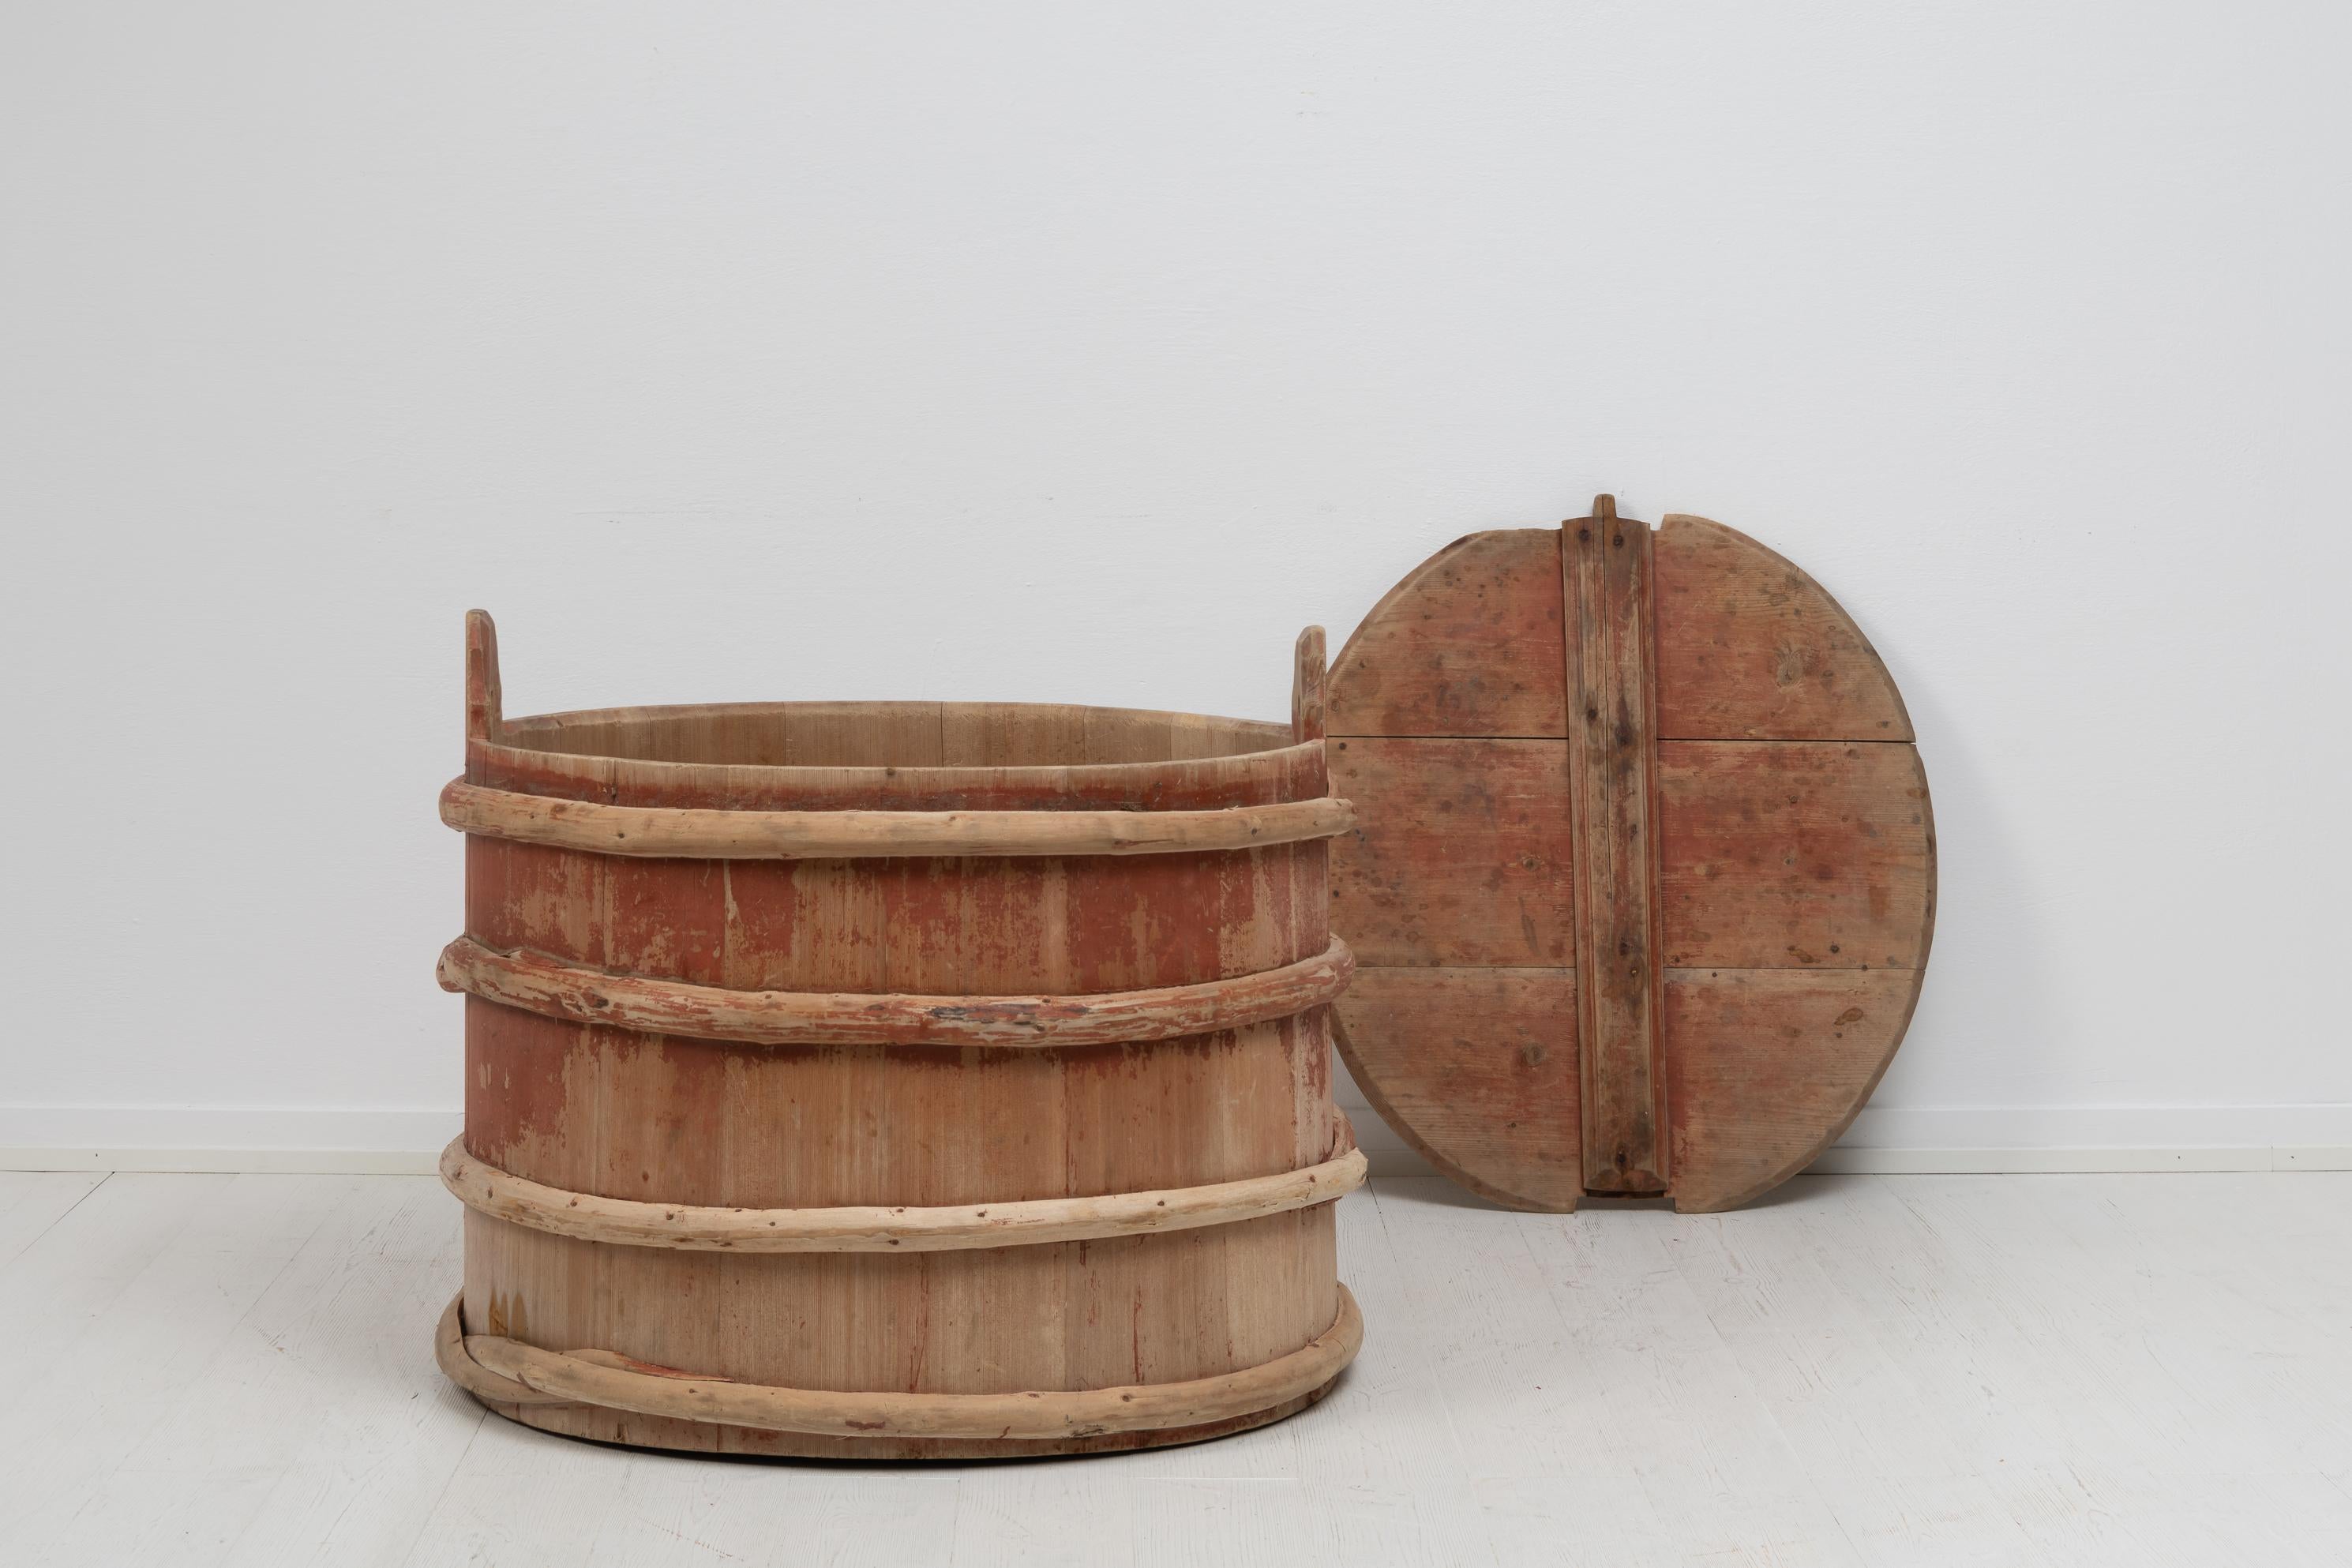 Swedish hand-crafted folk art wood barrel made around the mid 19th century, circa 1840 to 1850. The barrel is Swedish, made of pine and is in untouched original condition. The pine has traces of the original red paint. The barrel has the original